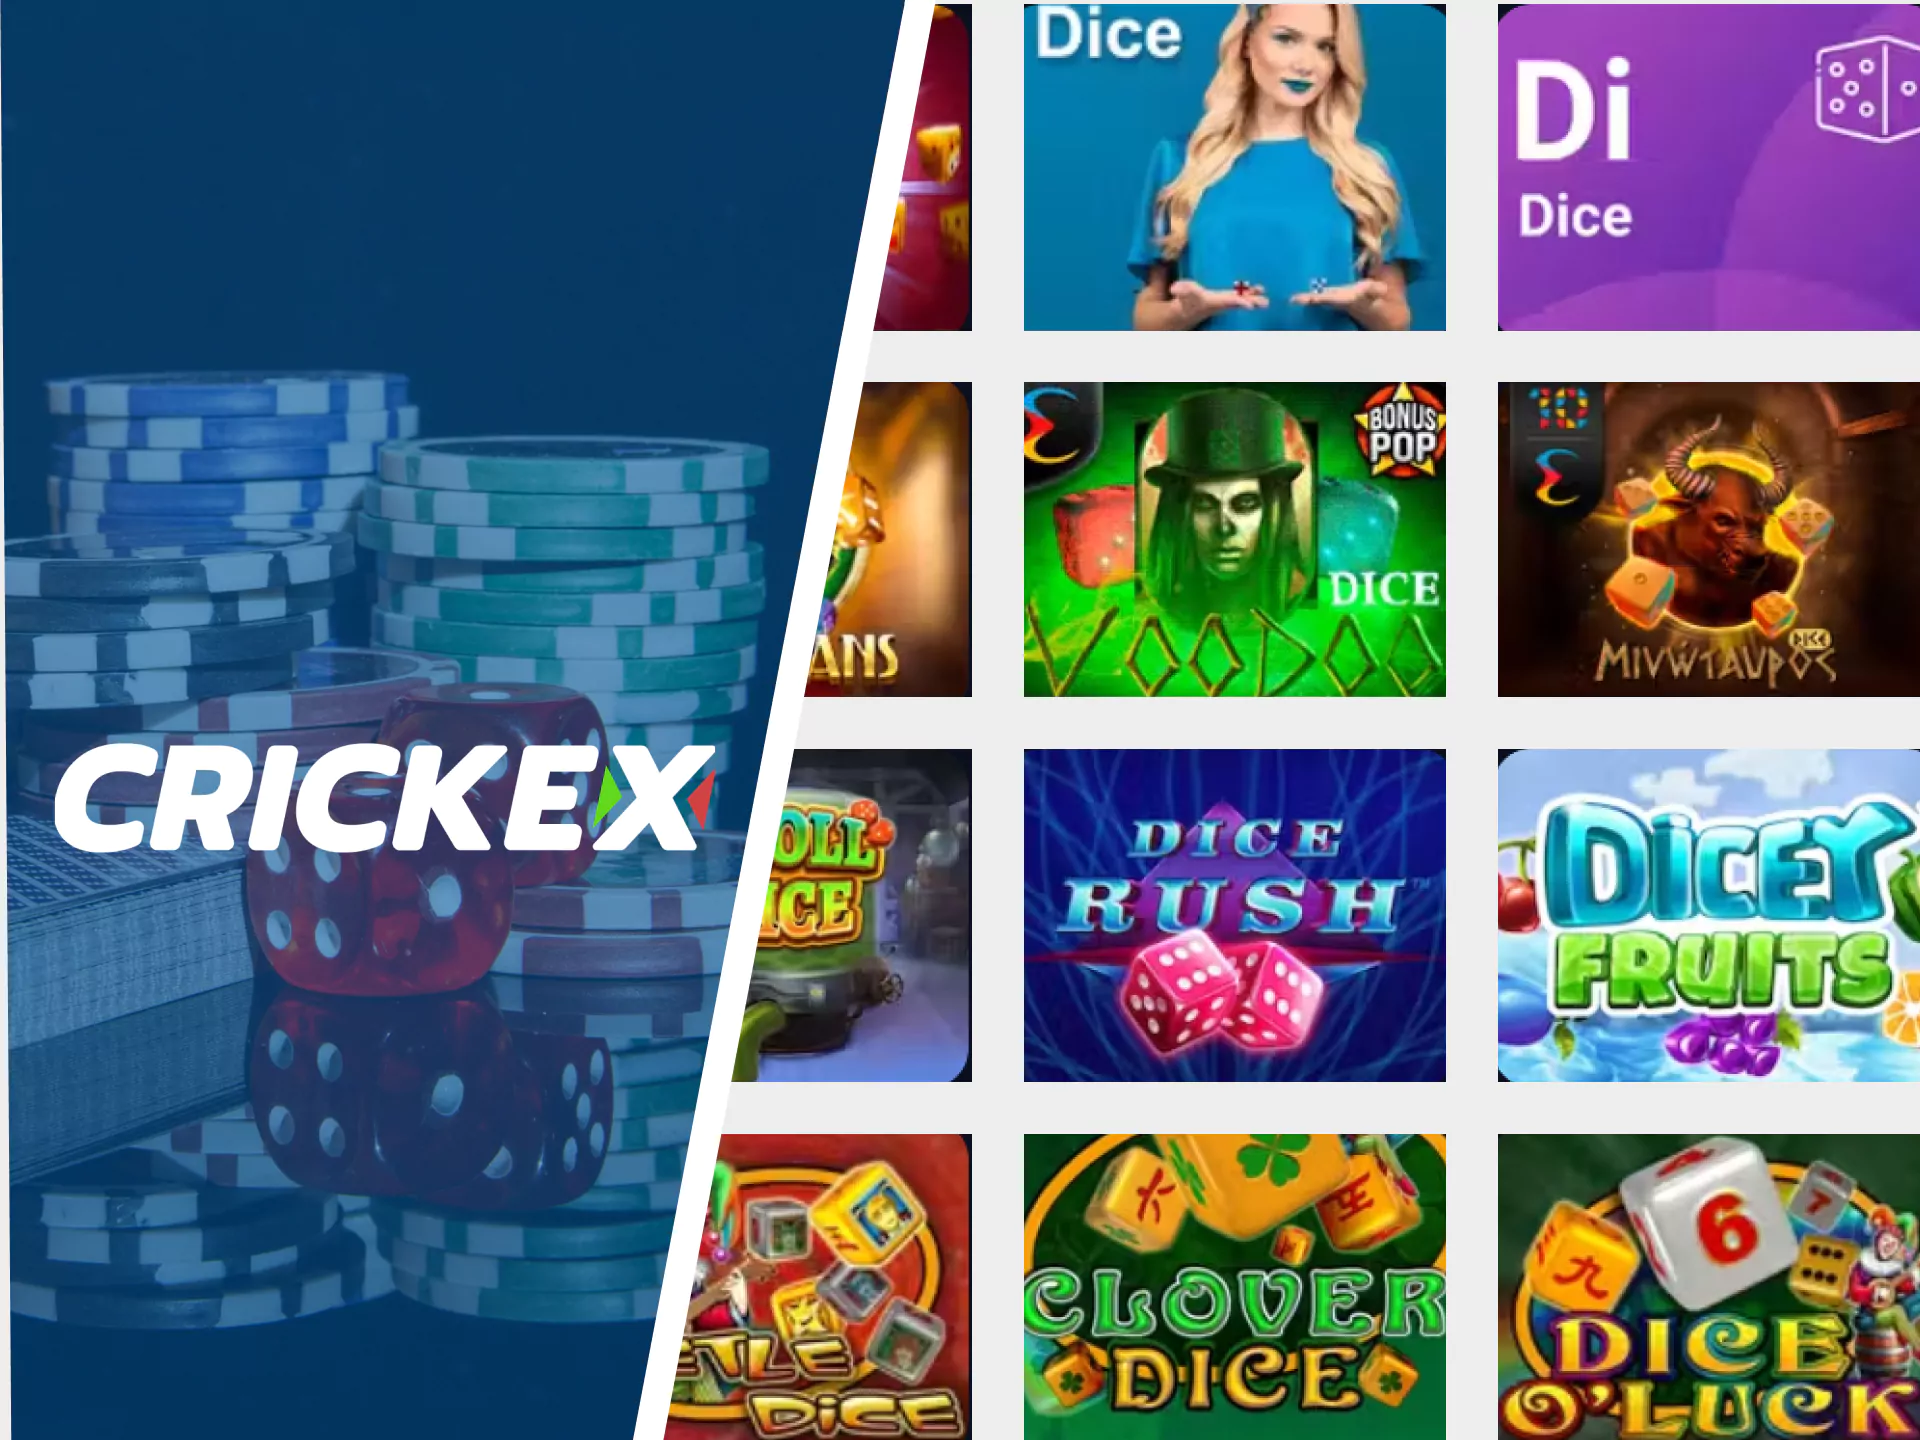 For casino games, choose dice from Crickex.